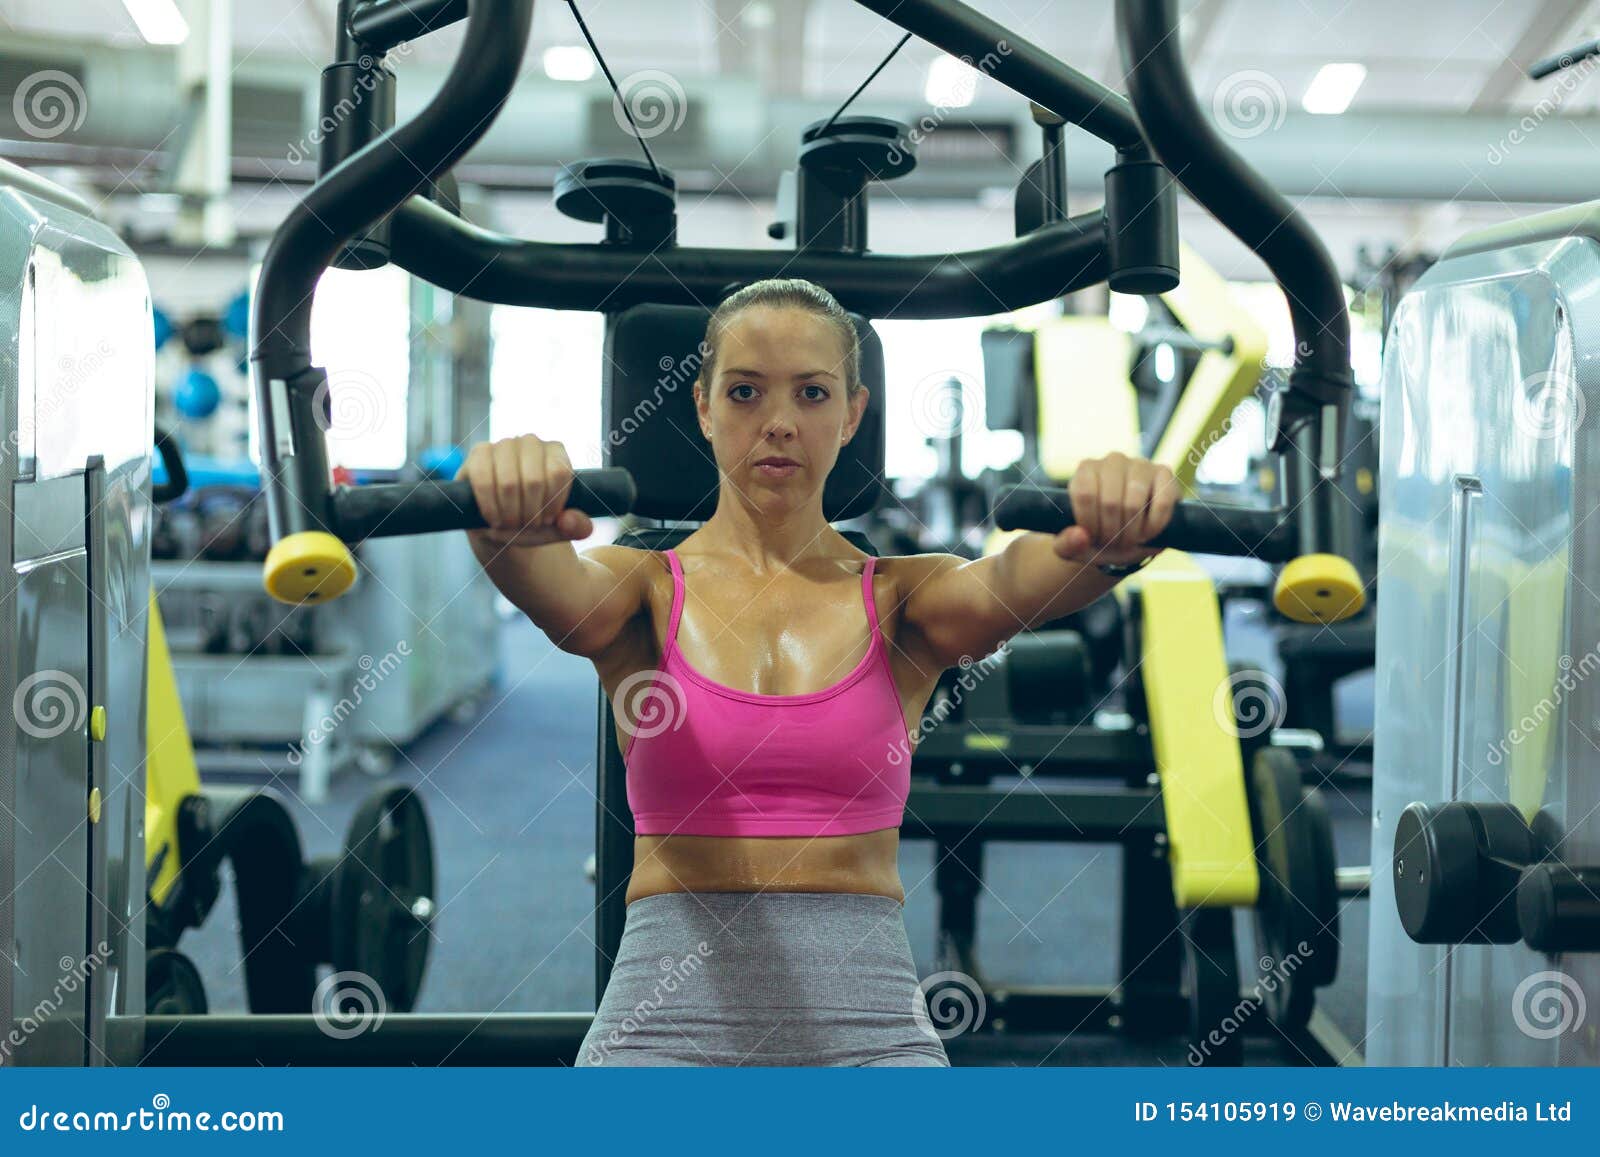 Female Athlete Exercising with Chest Press Machine in Fitness